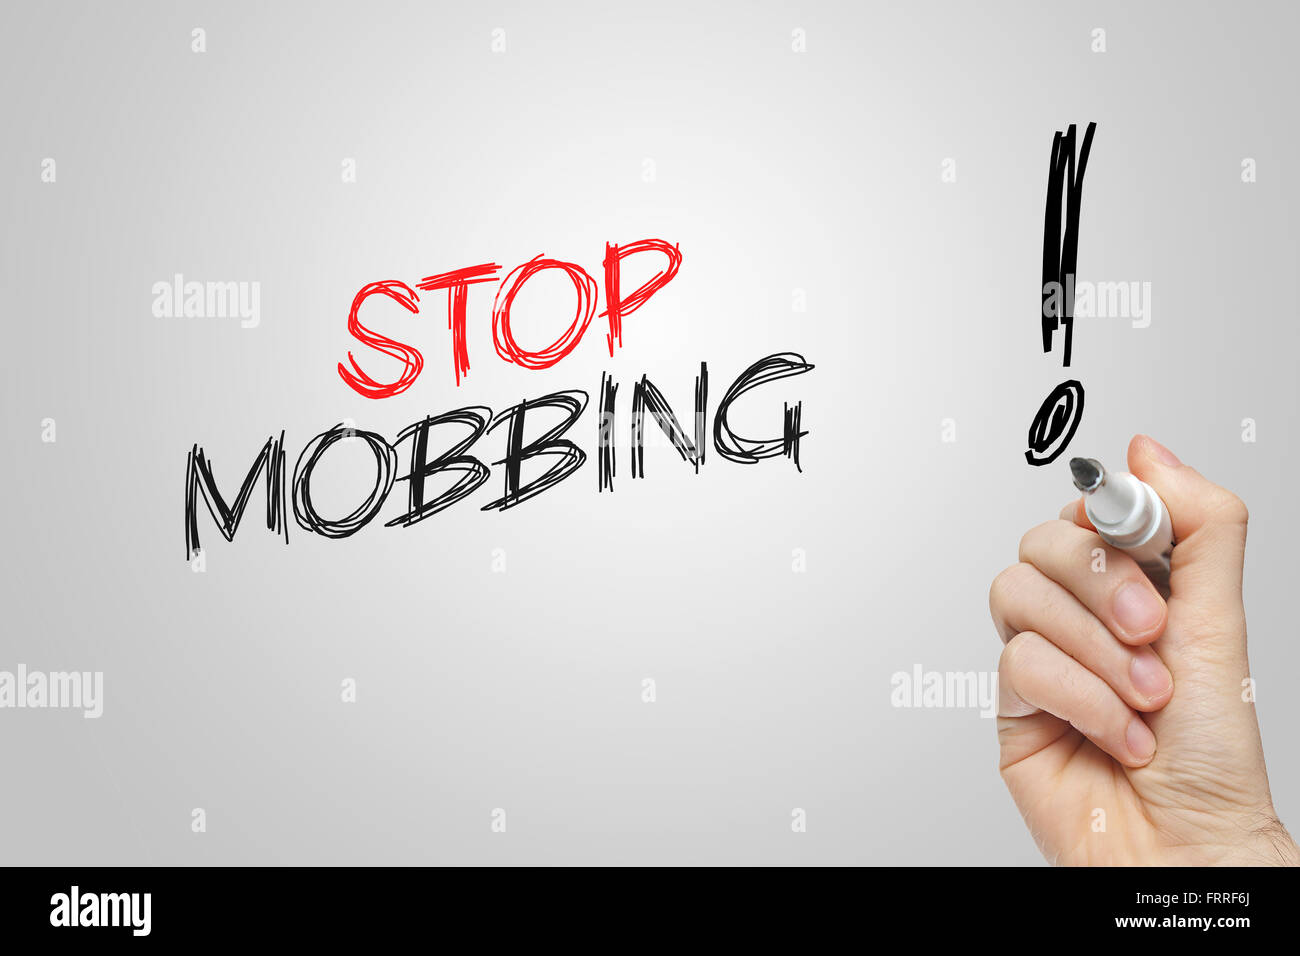 Hand writing stop mobbing on grey background Stock Photo